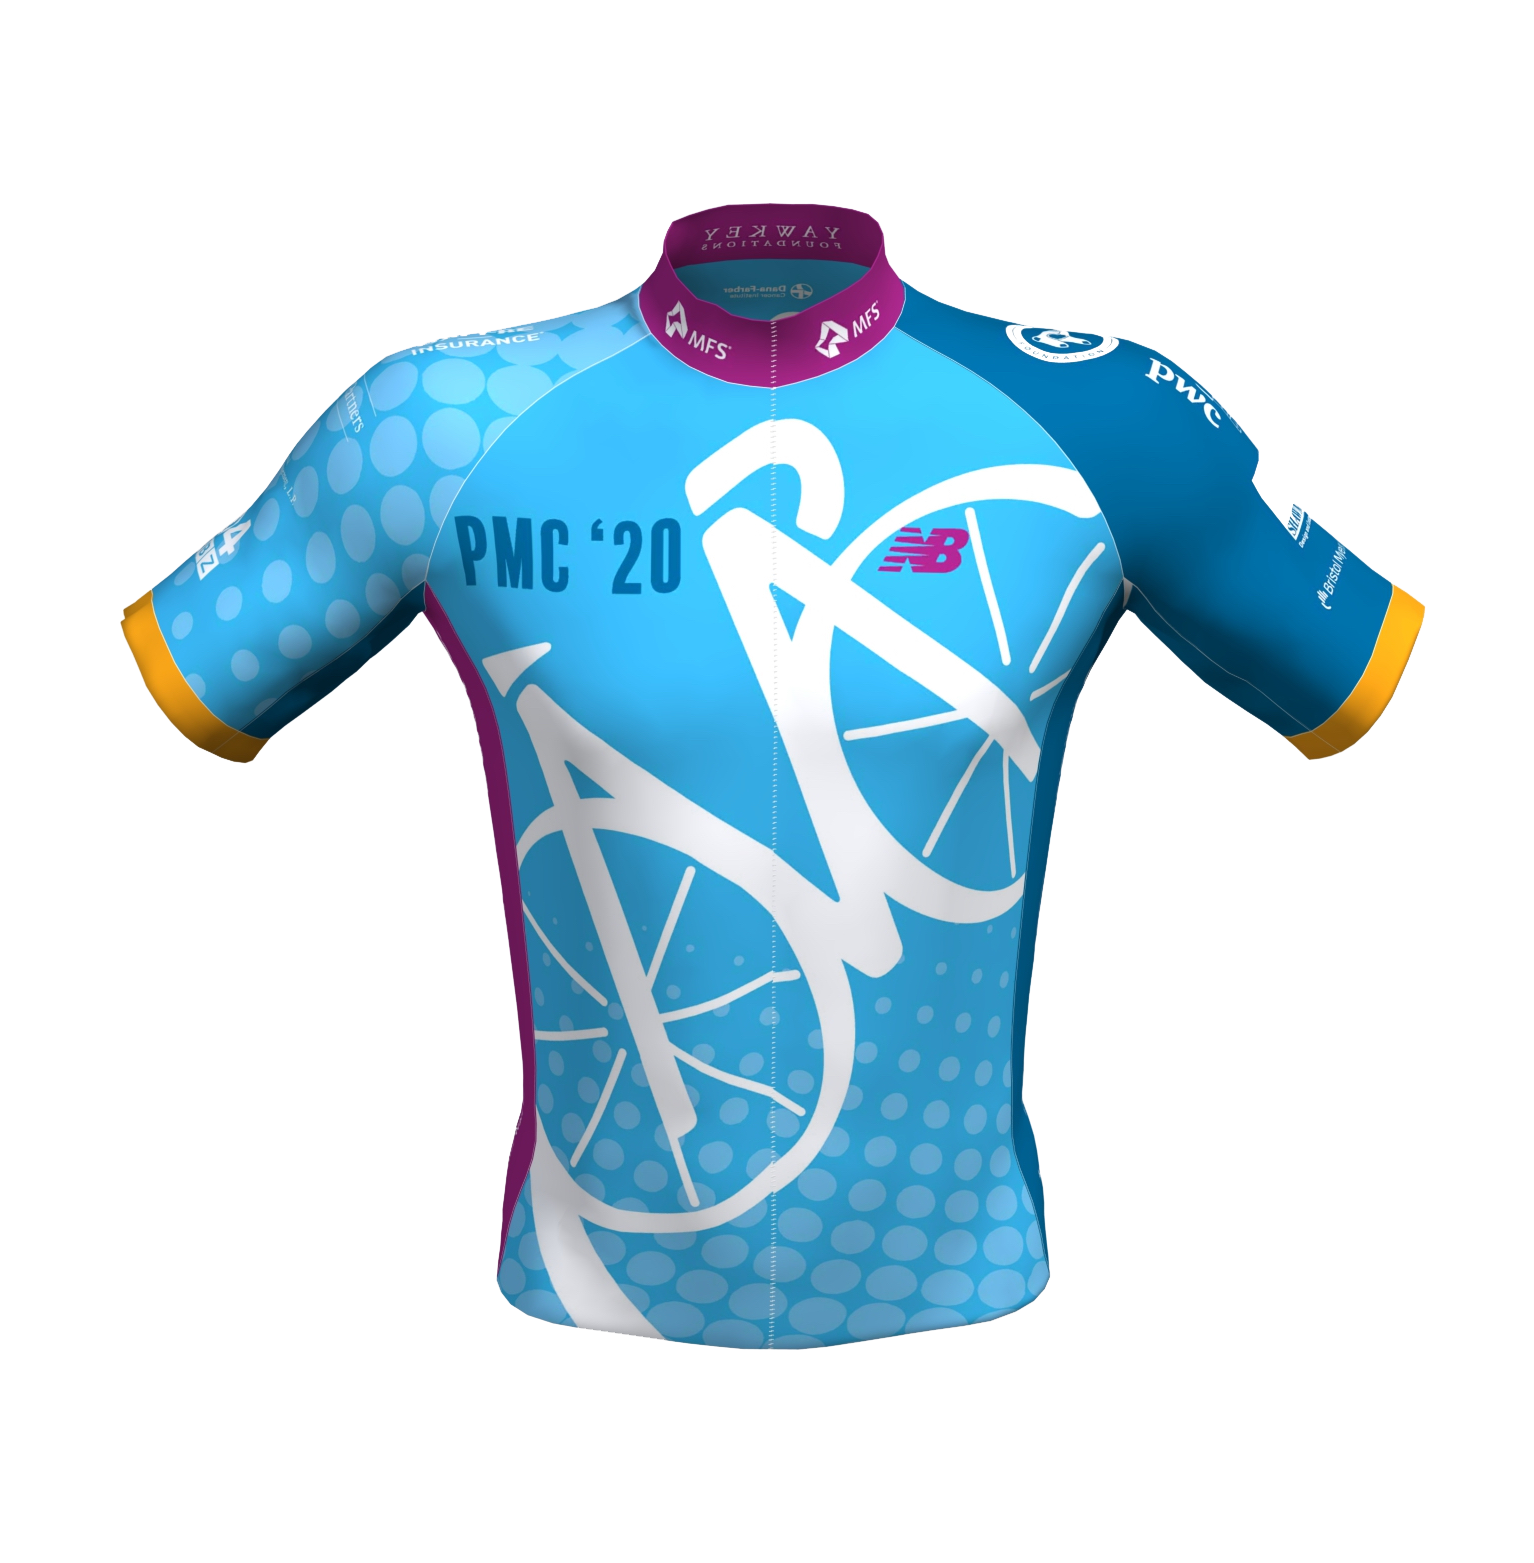 3D_2020 PMC Jersey_front